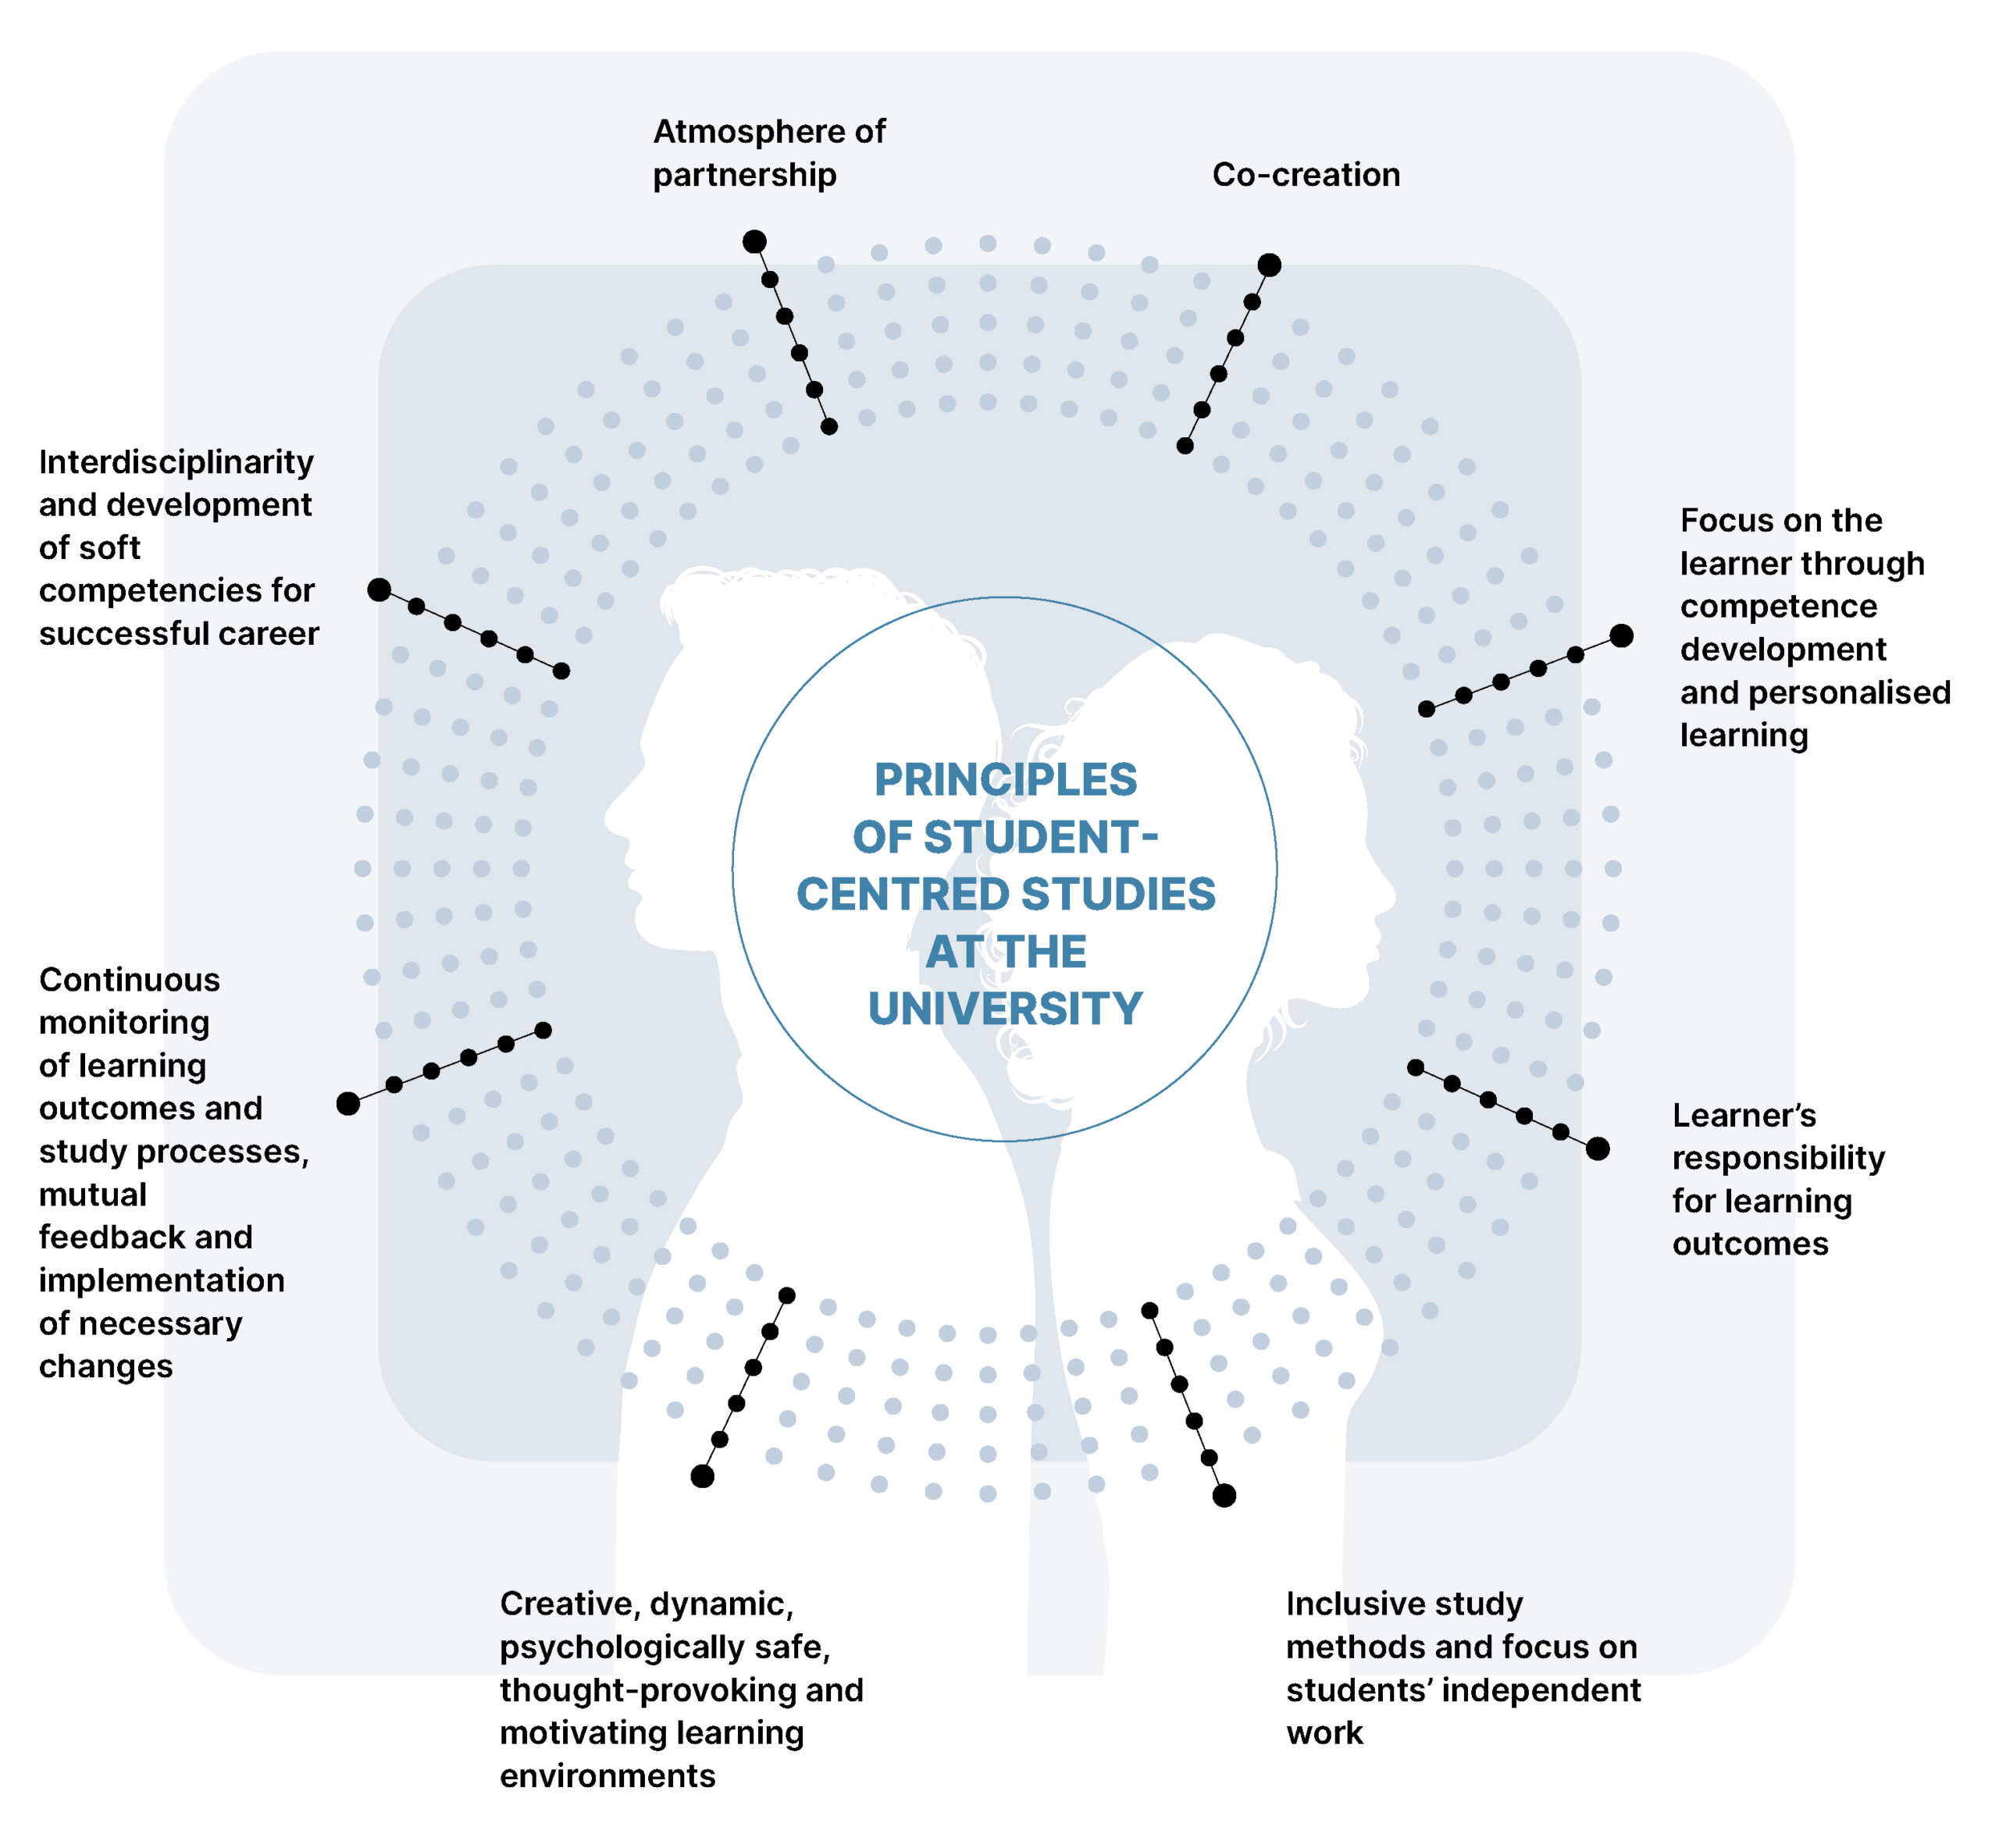 The principles of student-centred studies at the University